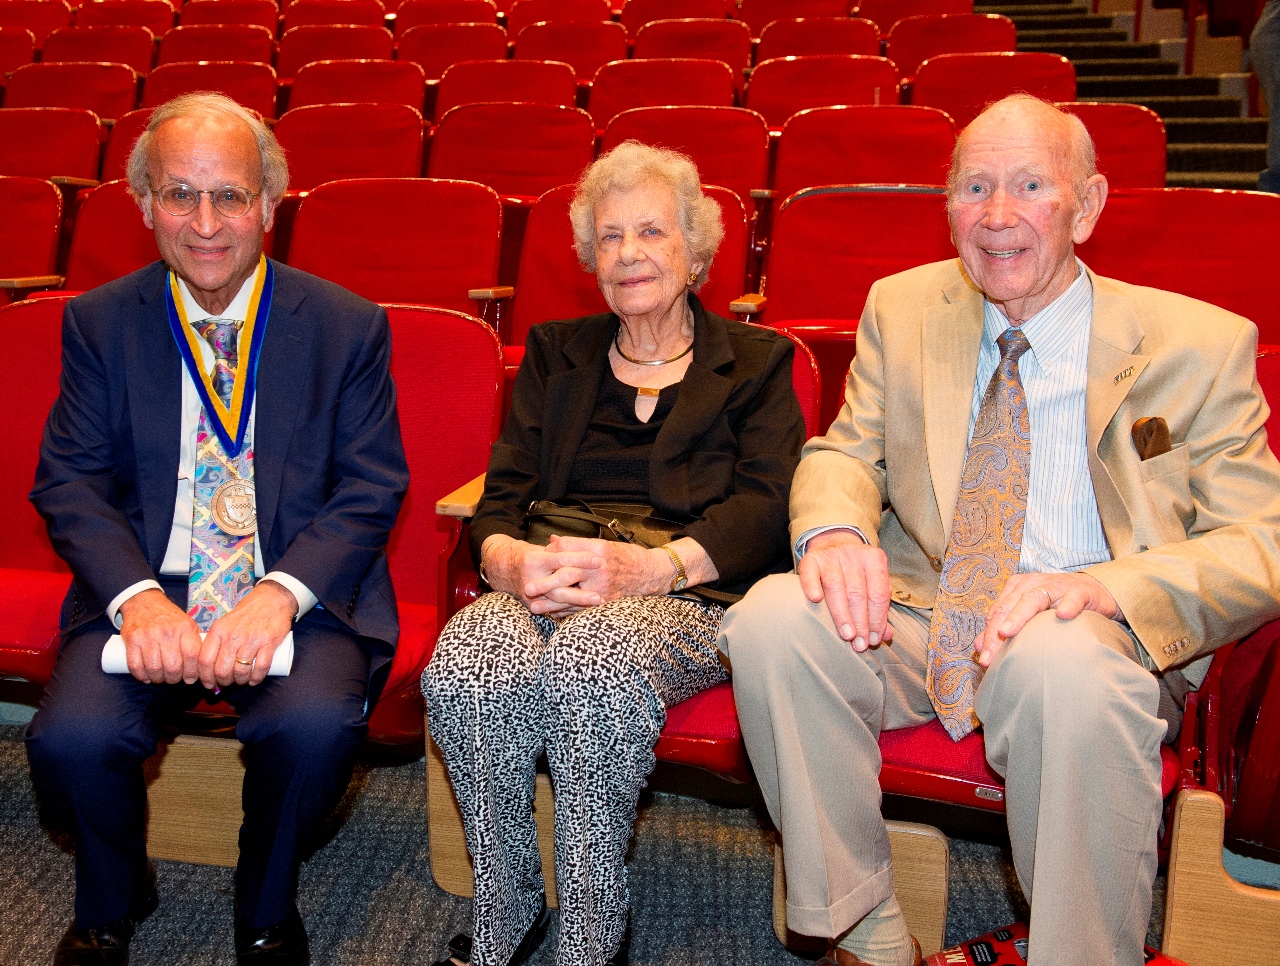 Dr. Art Levine with John and Gertrude Petersen.